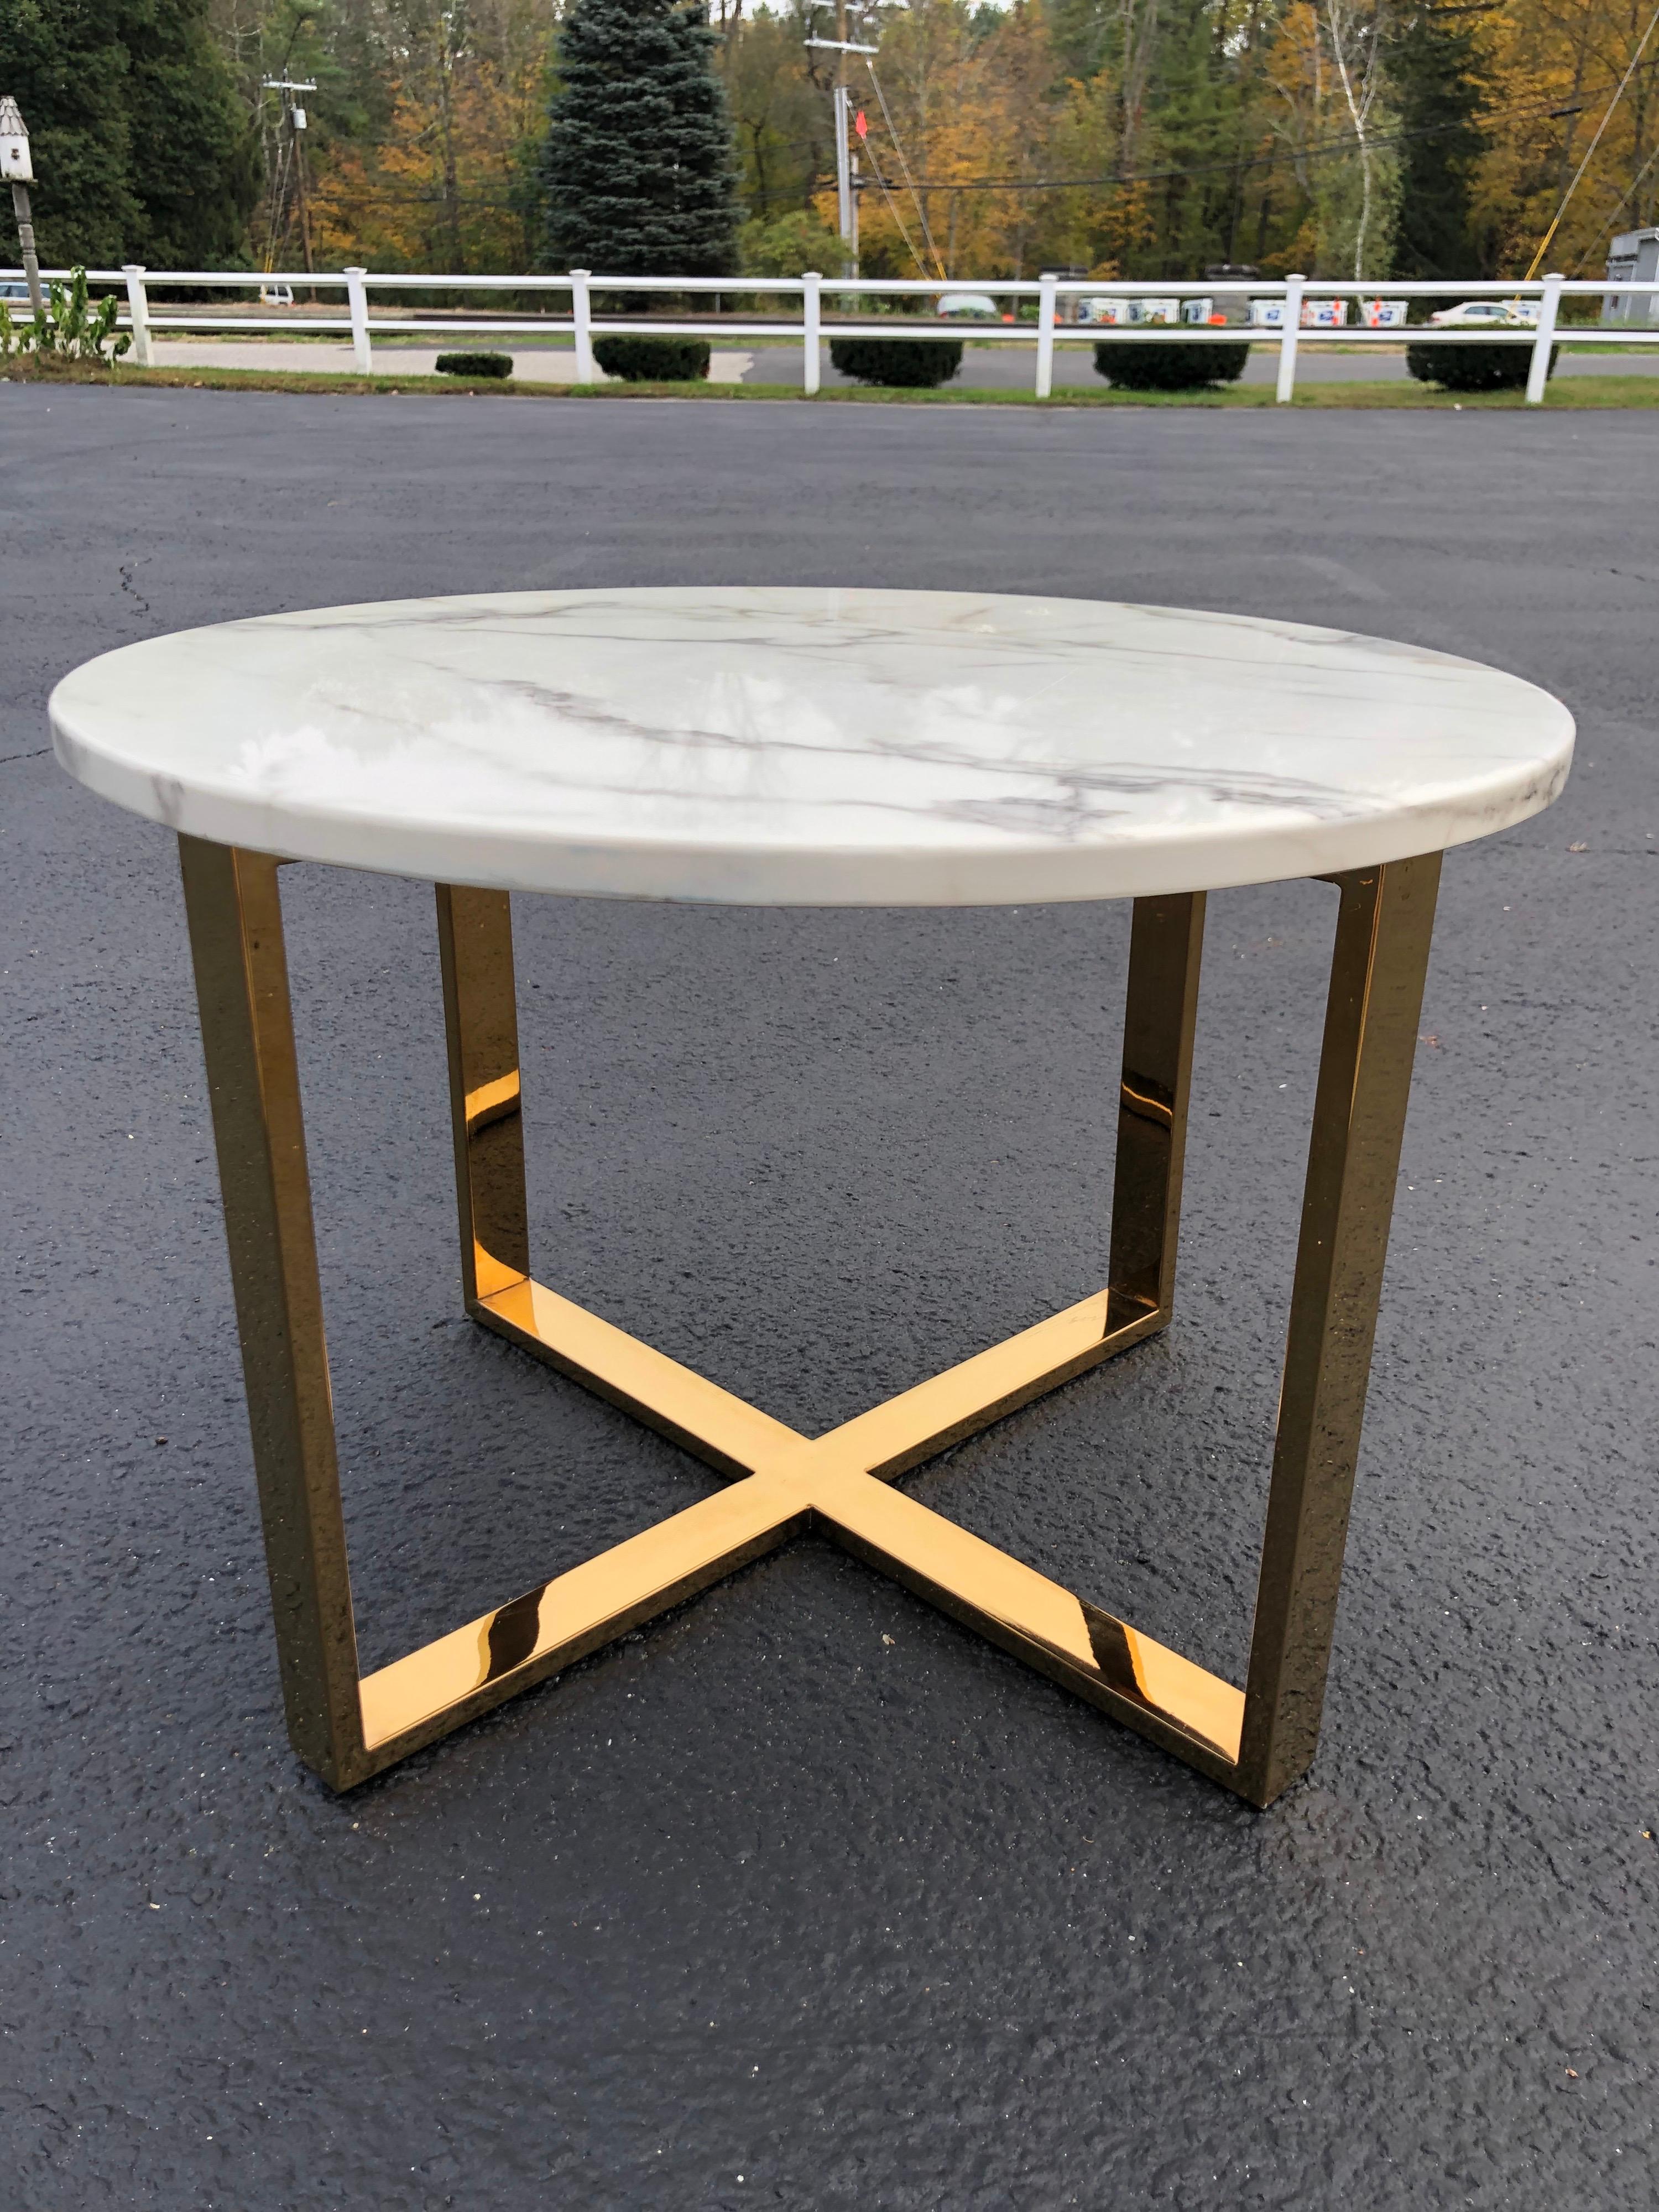 Mid Century round marble and brass table. Classic Carrara white marble top with gray veins throughout. Sits atop a modular brass base. Minimalist modern lines. Use as a side table of smaller coffee table.